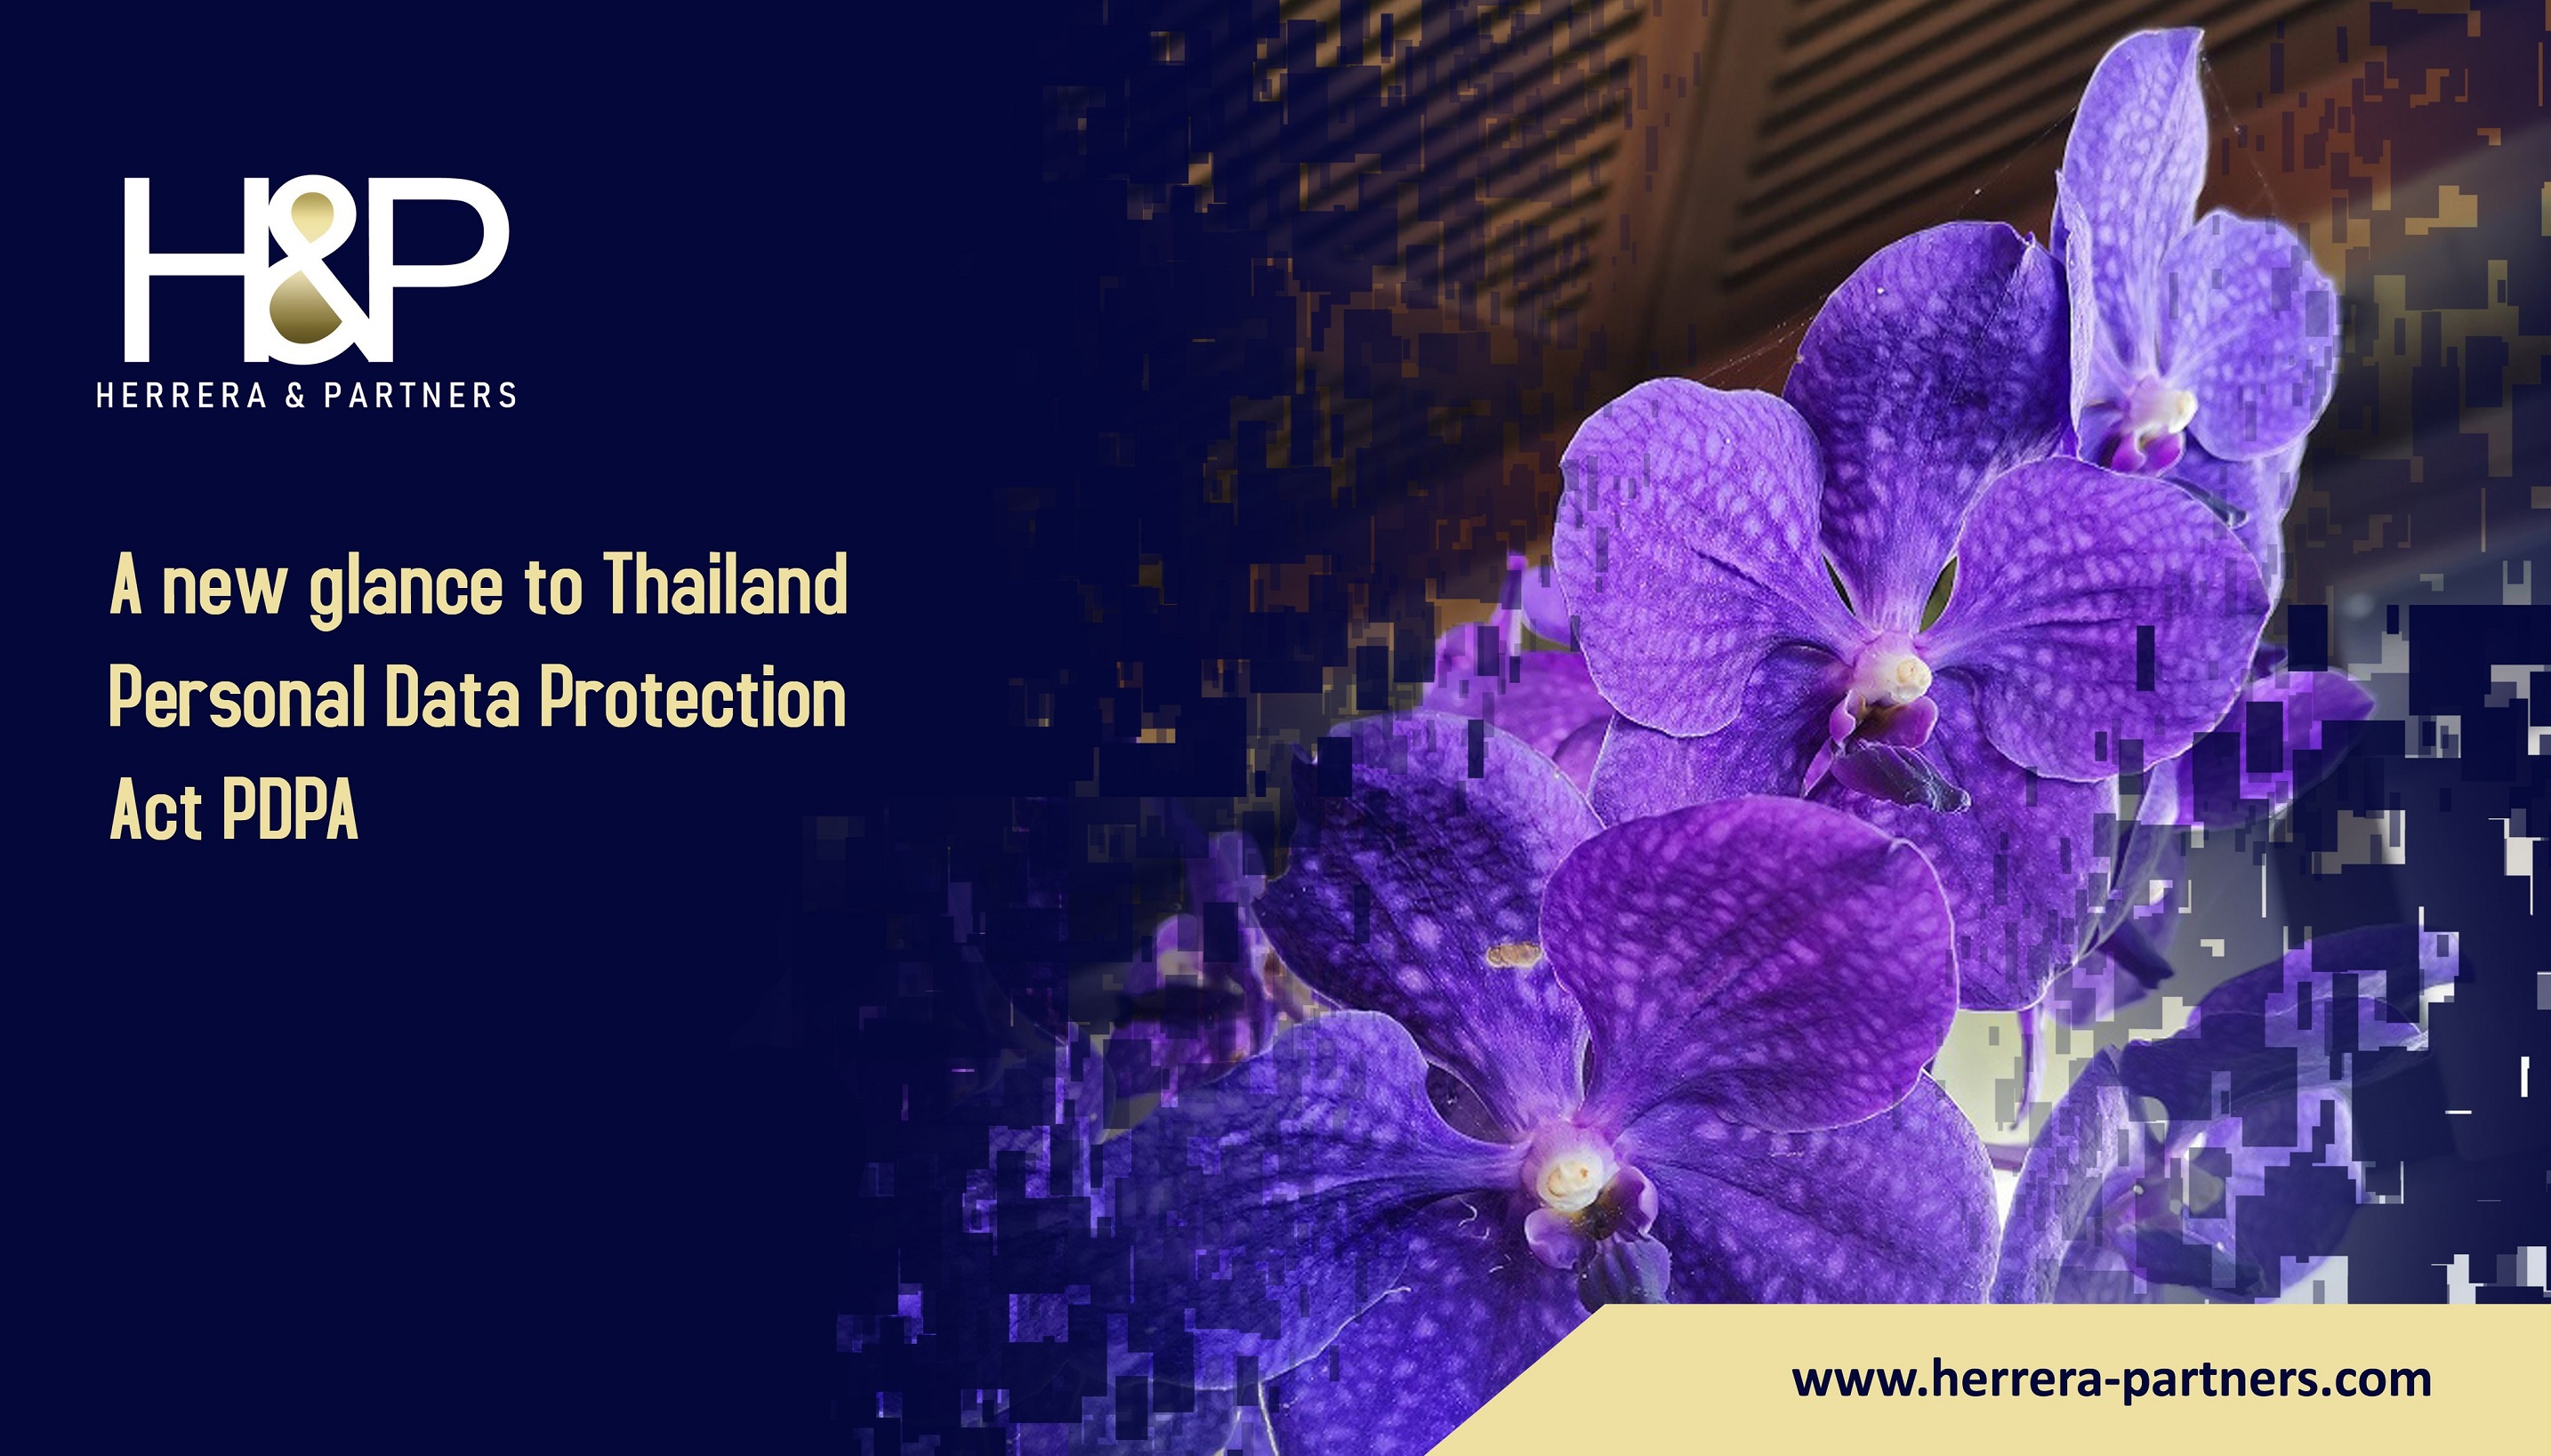 A new glance to Thailand Personal Data Protection Act PDPA H&P Law firm for data protection in Bangkok